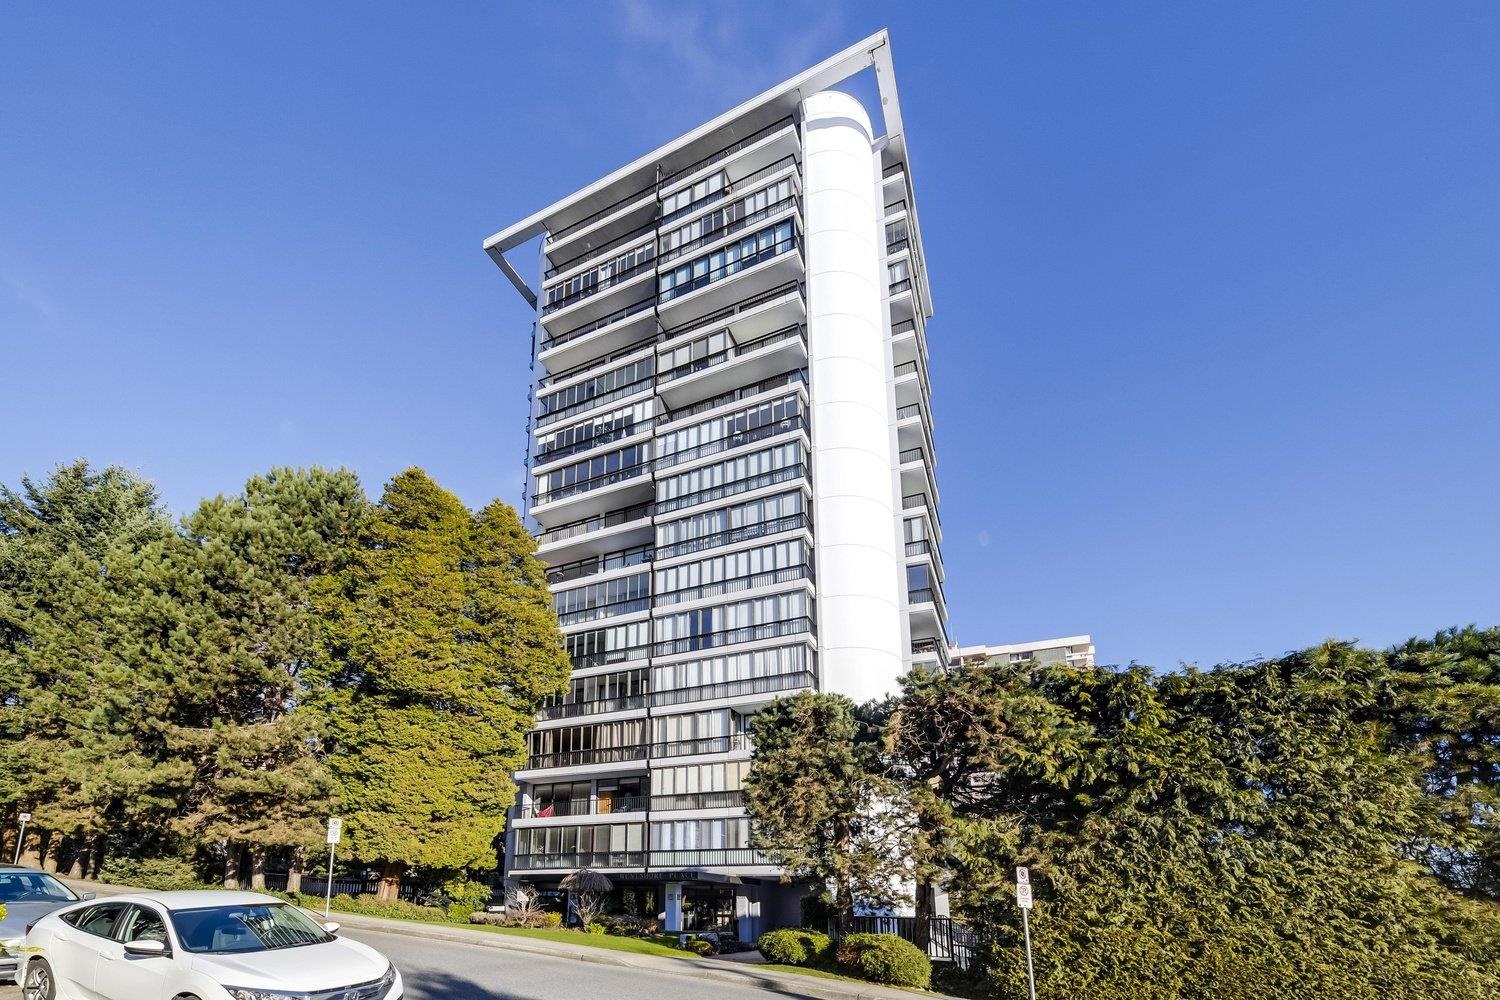 Ambleside Apartment/Condo for sale:  2 bedroom 1,000 sq.ft. (Listed 5200-04-29)